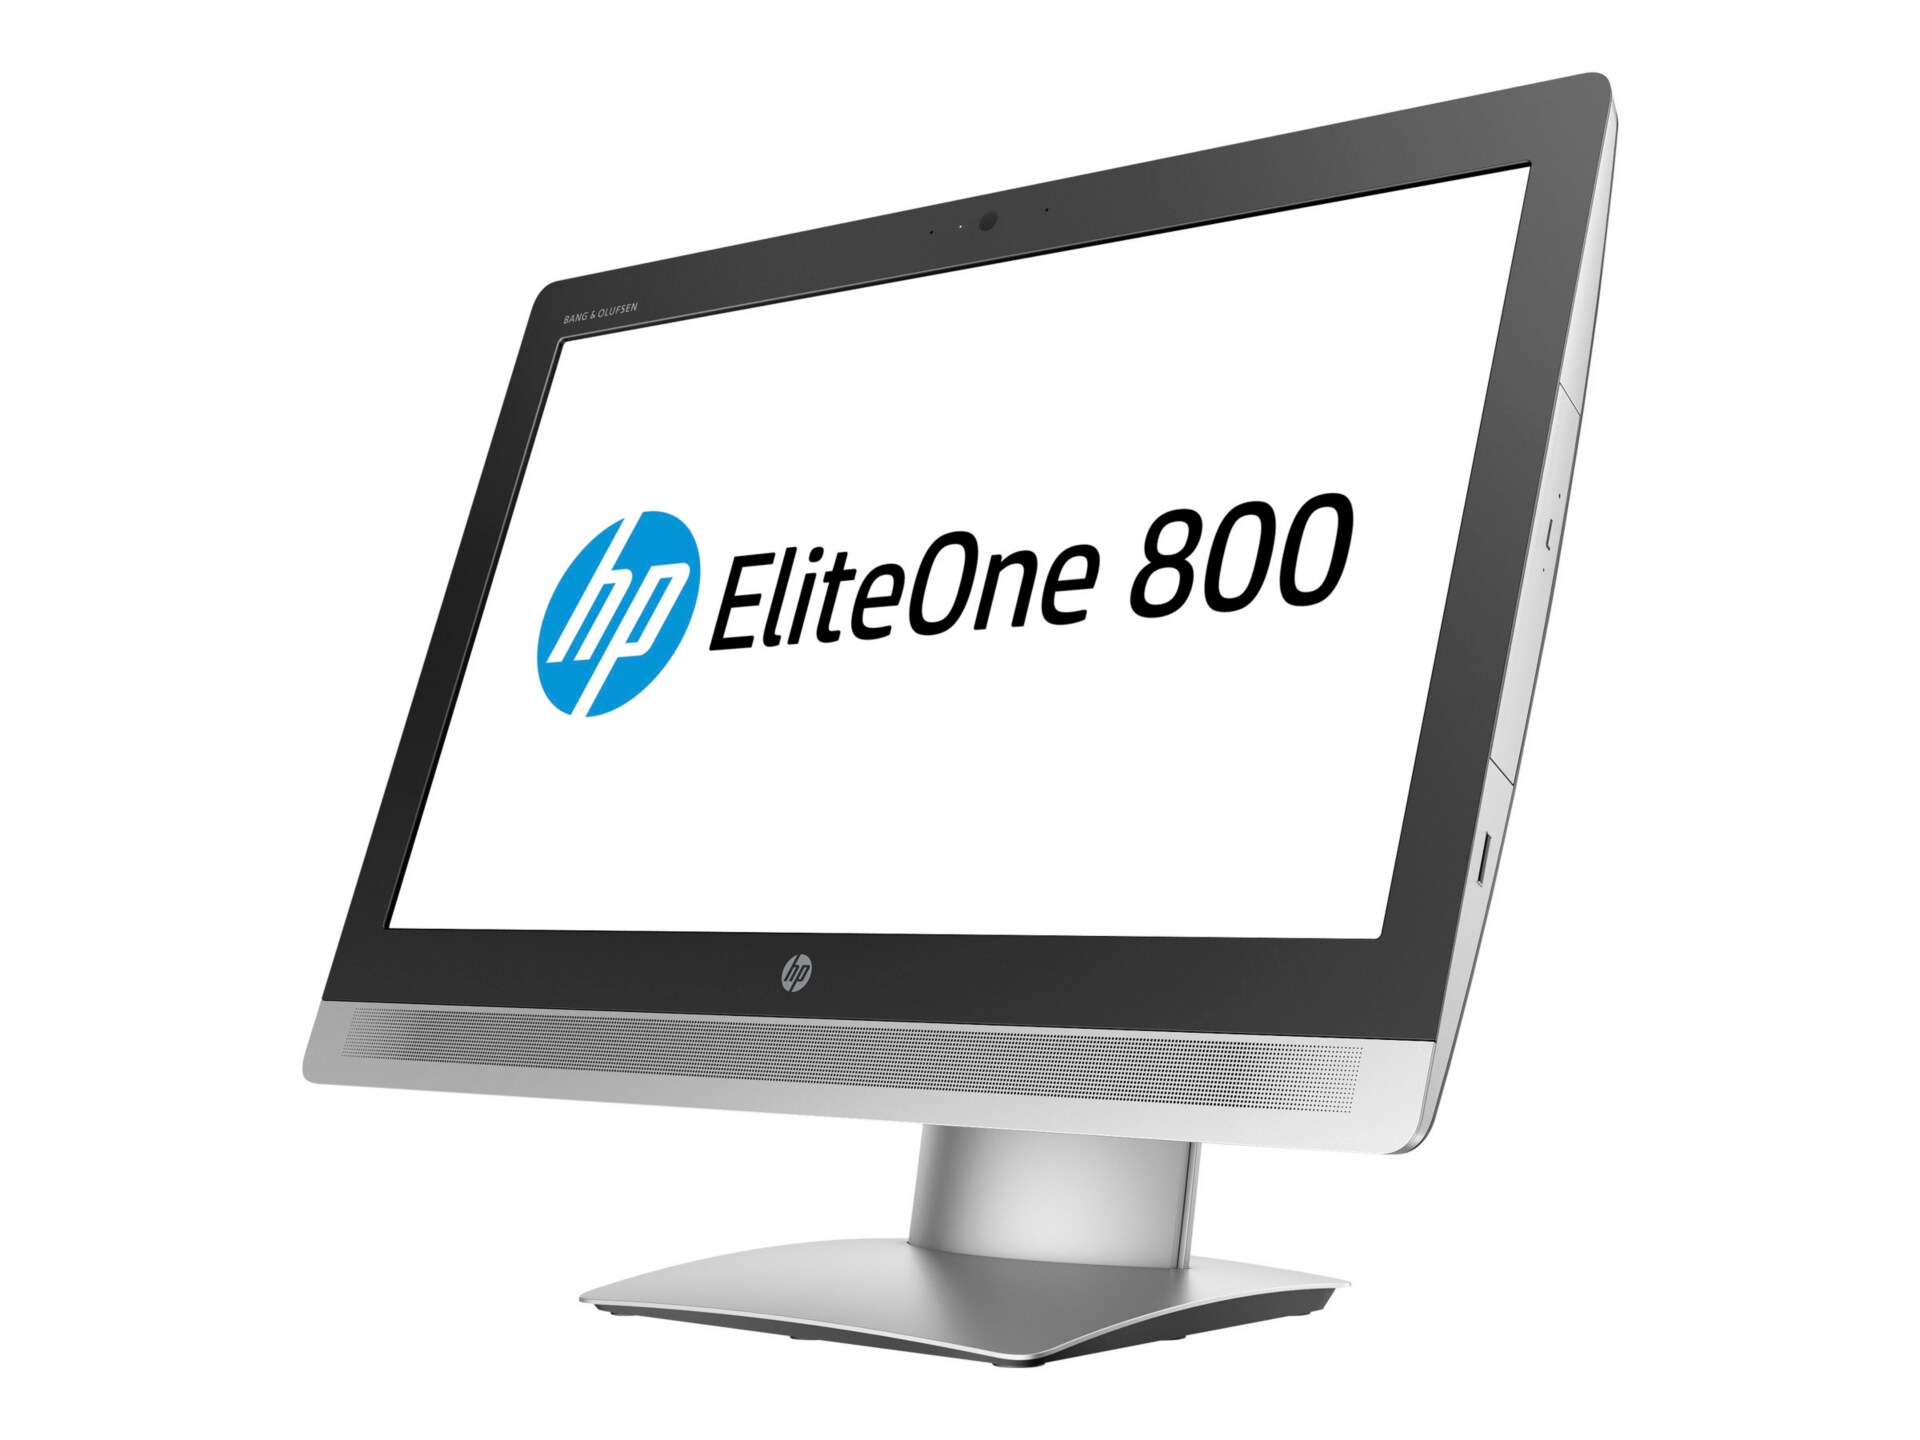 HP EliteOne 800 G2 - all-in-one - Core i7 6700 3.4 GHz - 8 GB - 256 GB - LED 23" - US